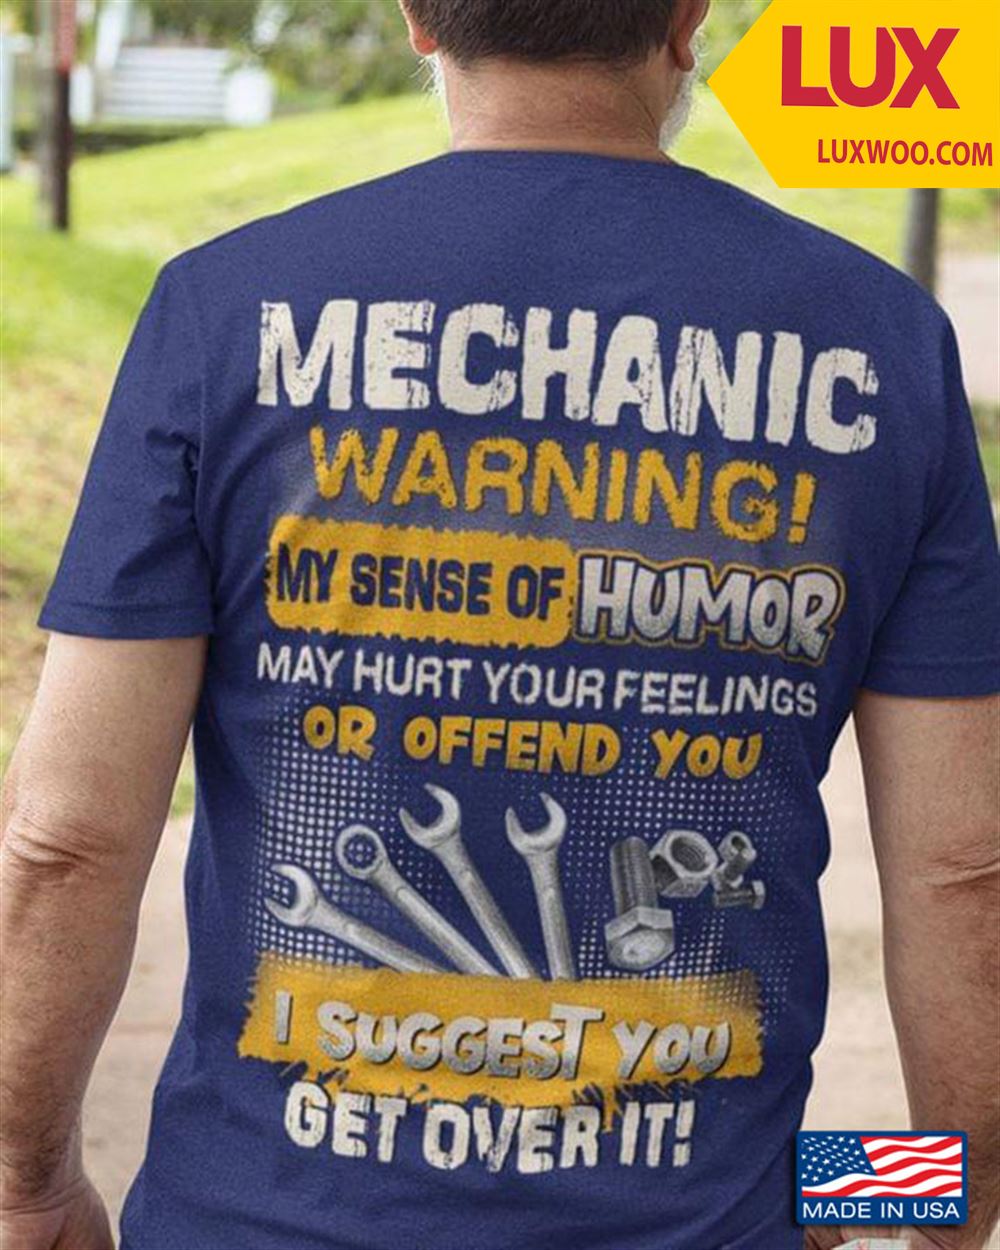 Mechanic Warning My Sense Of Humor May Hurt Your Feelings Or Offend You I Suggest You Get Over It Tshirt Size Up To 5xl